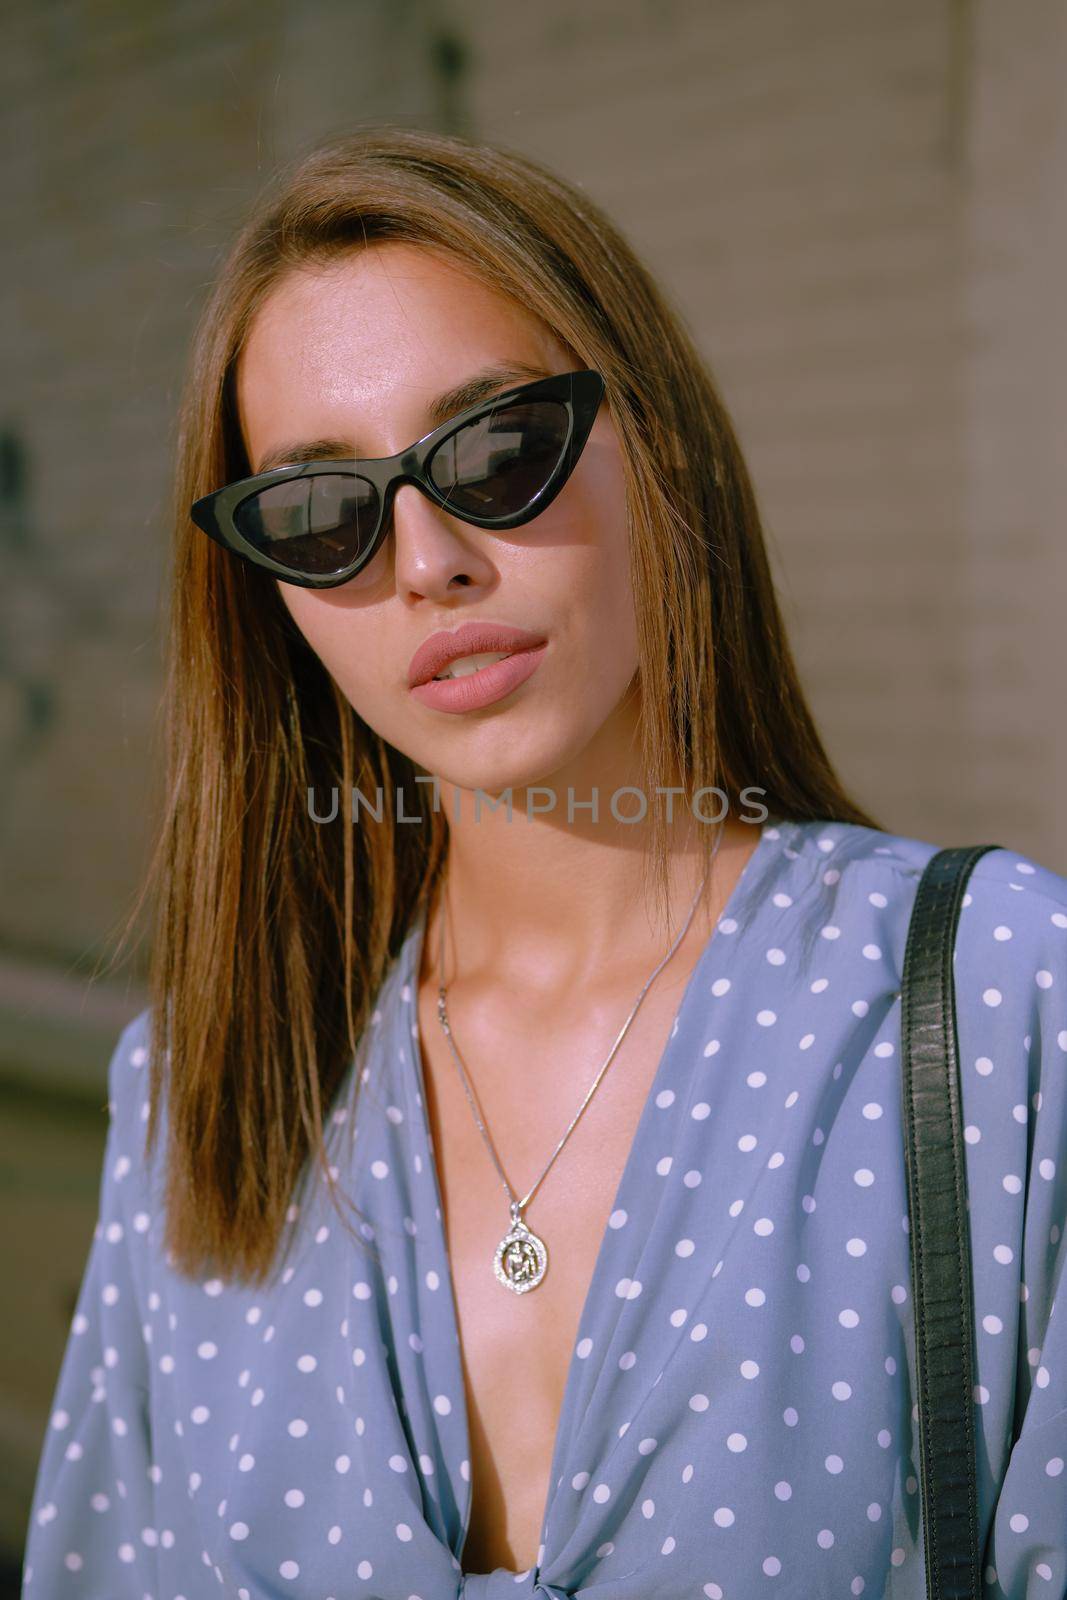 Beautiful blonde lady in a long blue dress with polka-dots, watch, sunglasses, with a pendant around her neck and a small black handbag on her shoulder is looking at the camera while walking alone in the city. The concept of fashion and style. Close-up shot.